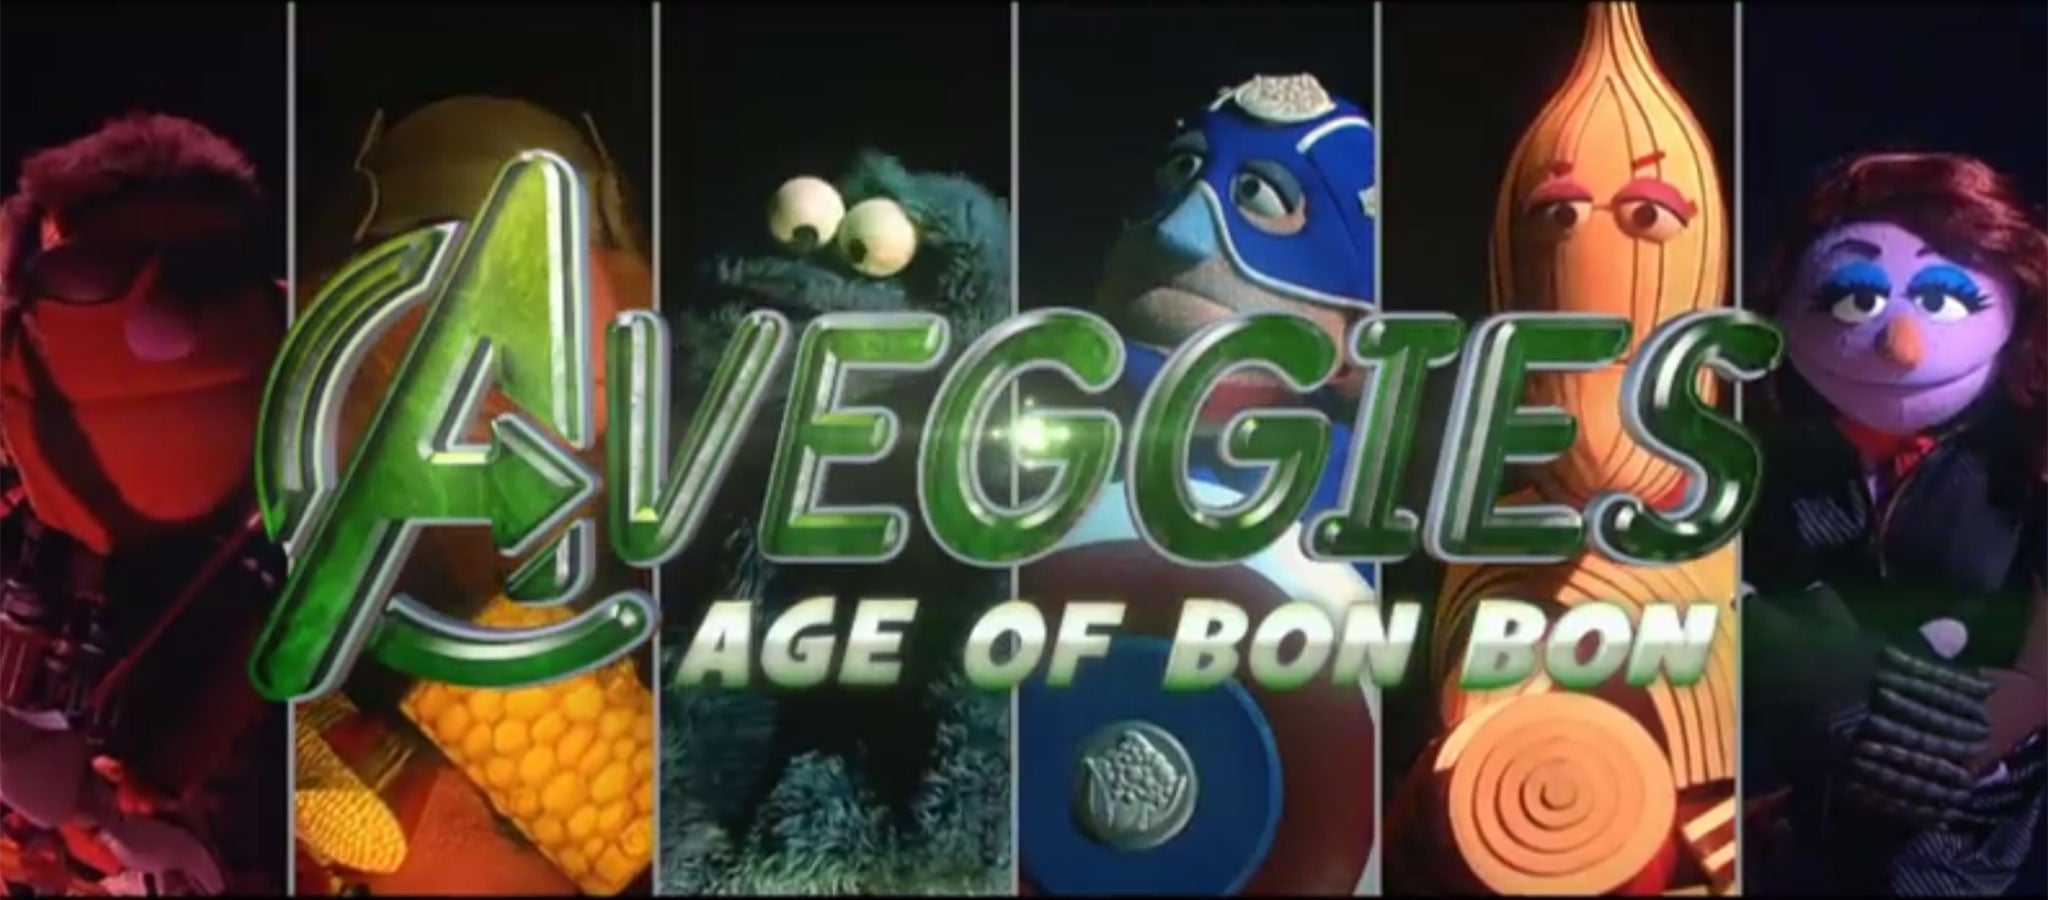 Introducing the Aveggies, a whole new gang of Bon Bon-fighting superheroes